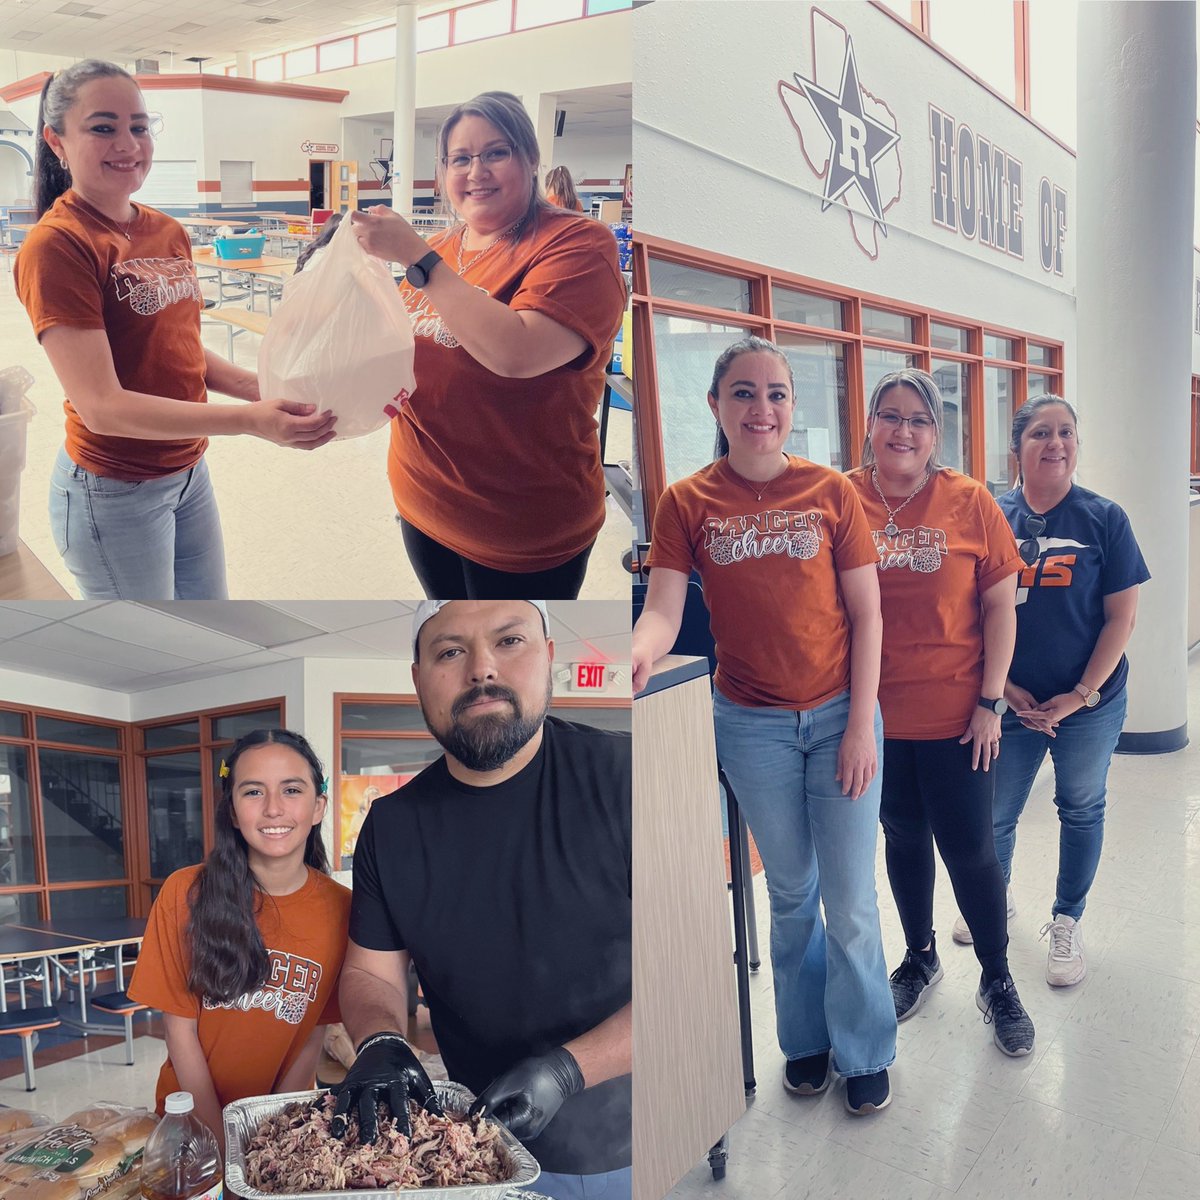 Thank you all for your support❤️🙏It was a beautiful and productive afternoon, serving and team bonding! Hoping you enjoyed our delicious sandwiches, we are one step closer to our goal. Special shoutout to our cheer parents, you rock! @Riverside_4ever